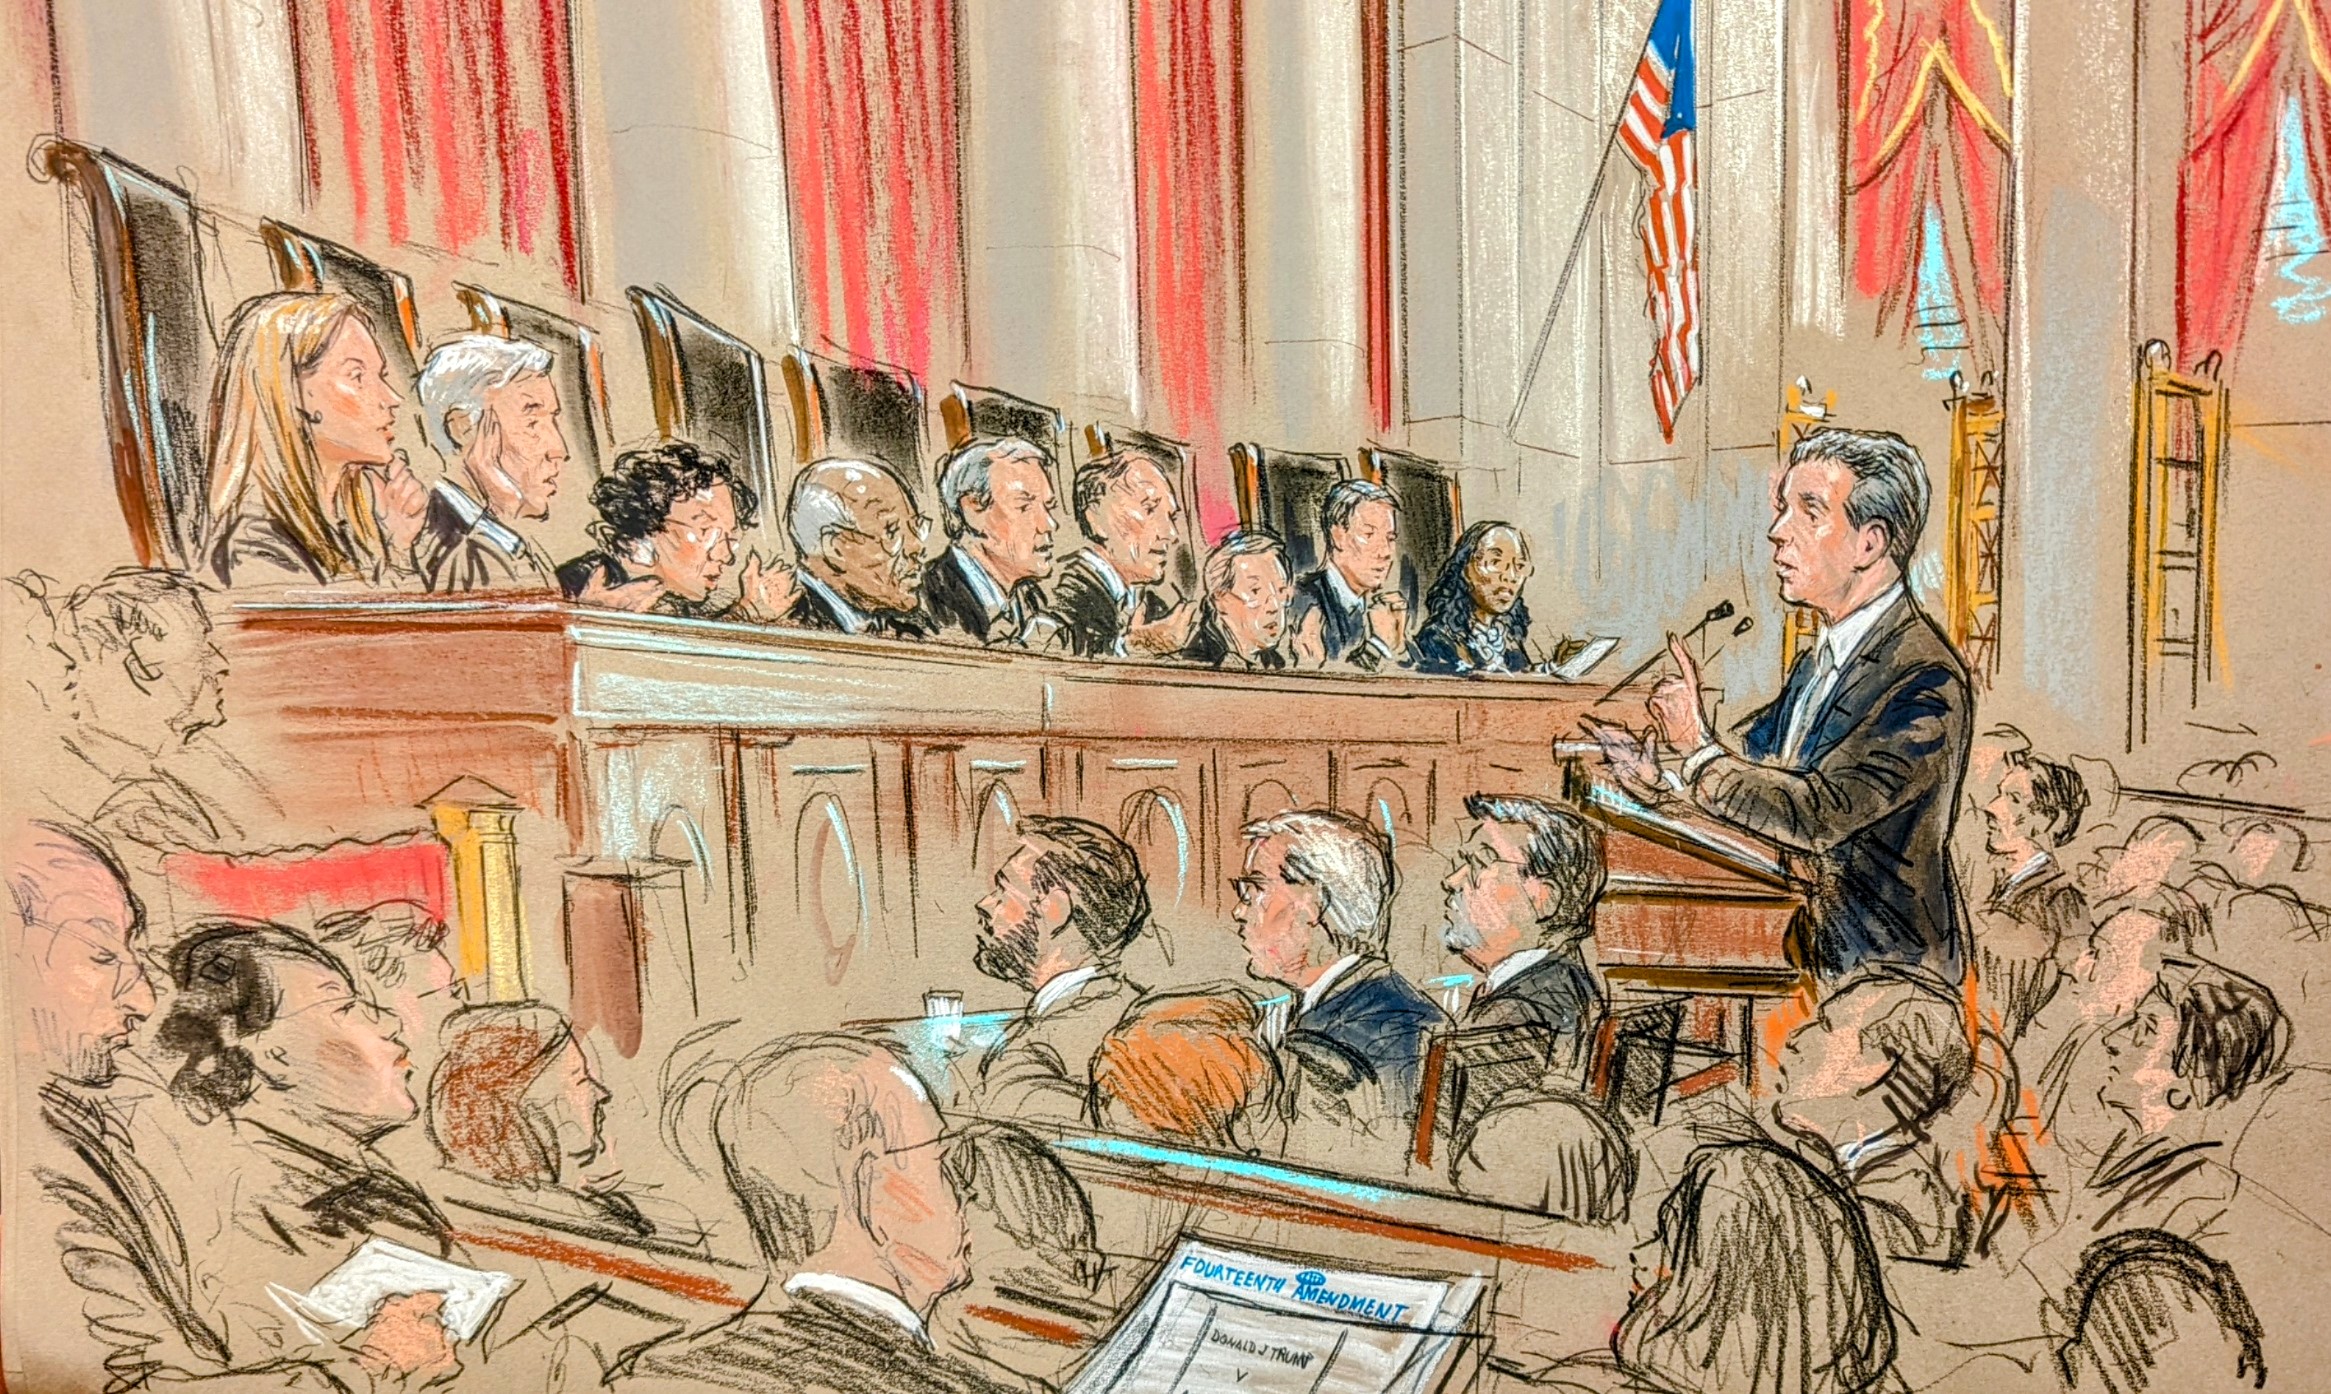 Jonathan Mitchell, an attorney representing former President Donald Trump, speaks in front of the Supreme Court during oral arguments on February 8.